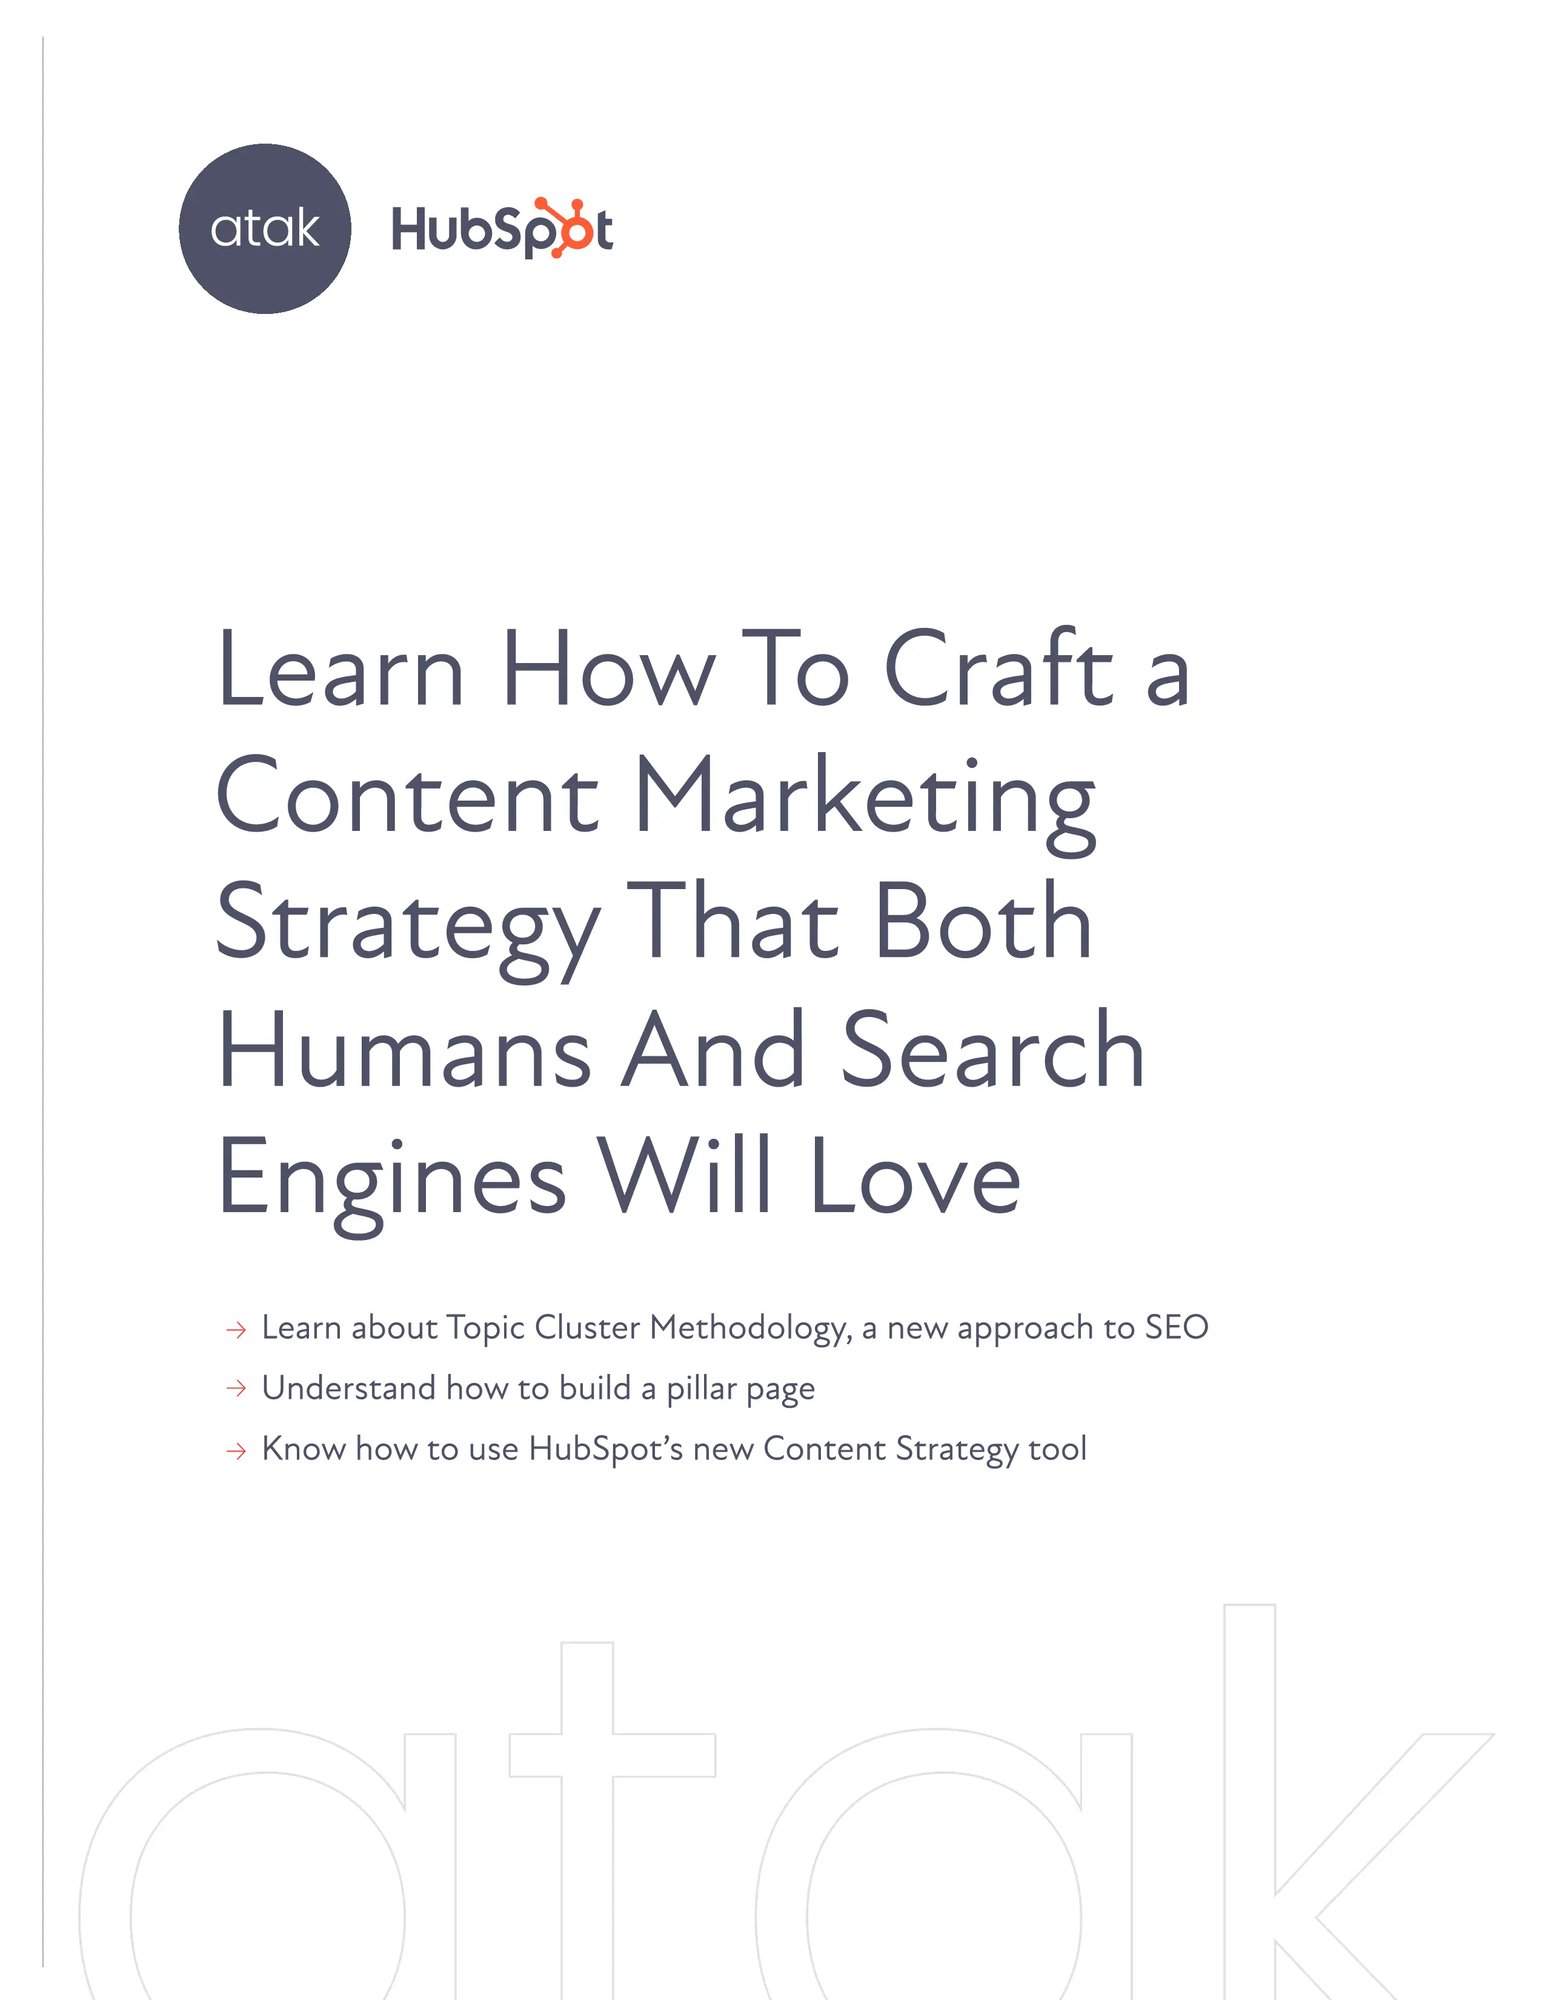 Learn How To Craft a Content Marketing Strategy That Both Humans And Search Engines Will Love